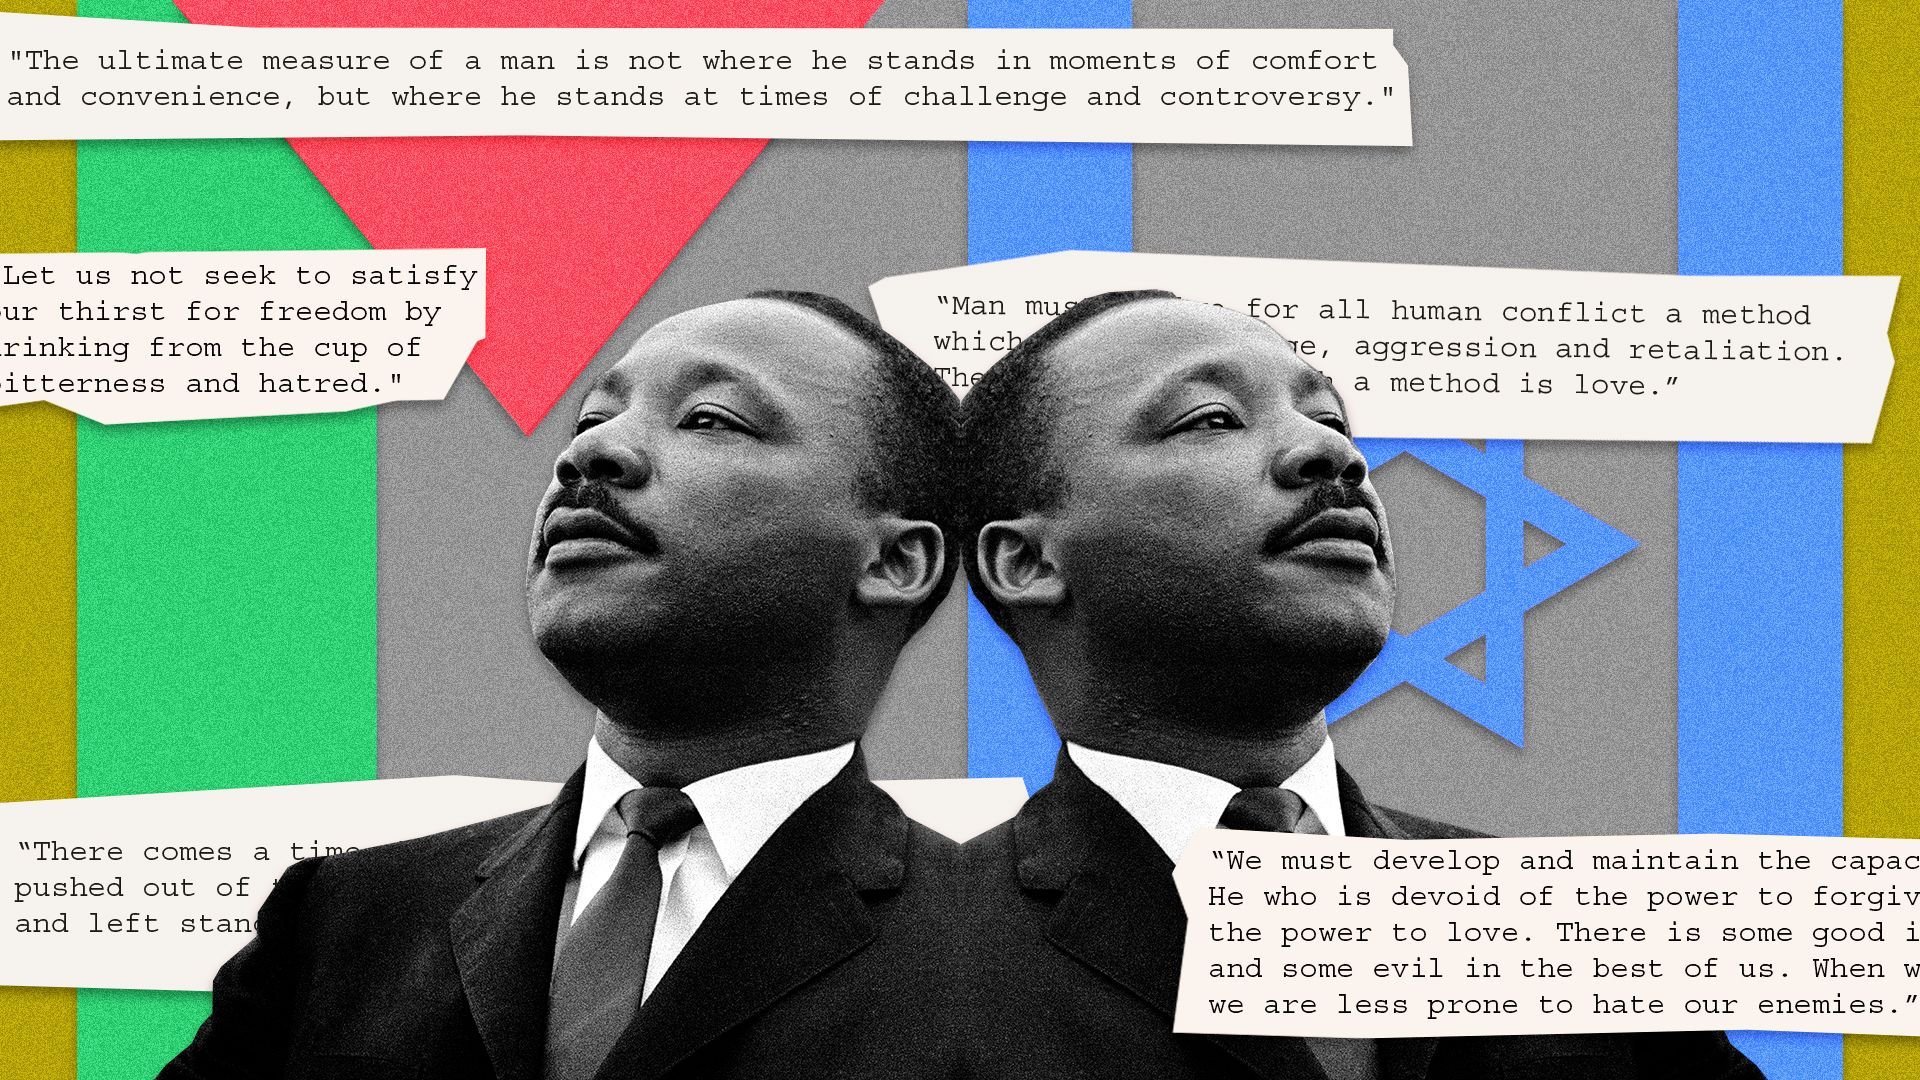 Photo illustration of Dr. Martin Luther King Junior's photo mirrored, so he appears to be looking both left and right. His images are surrounded by five of his famous quotes, as well as the Israel and Palestine flags. 